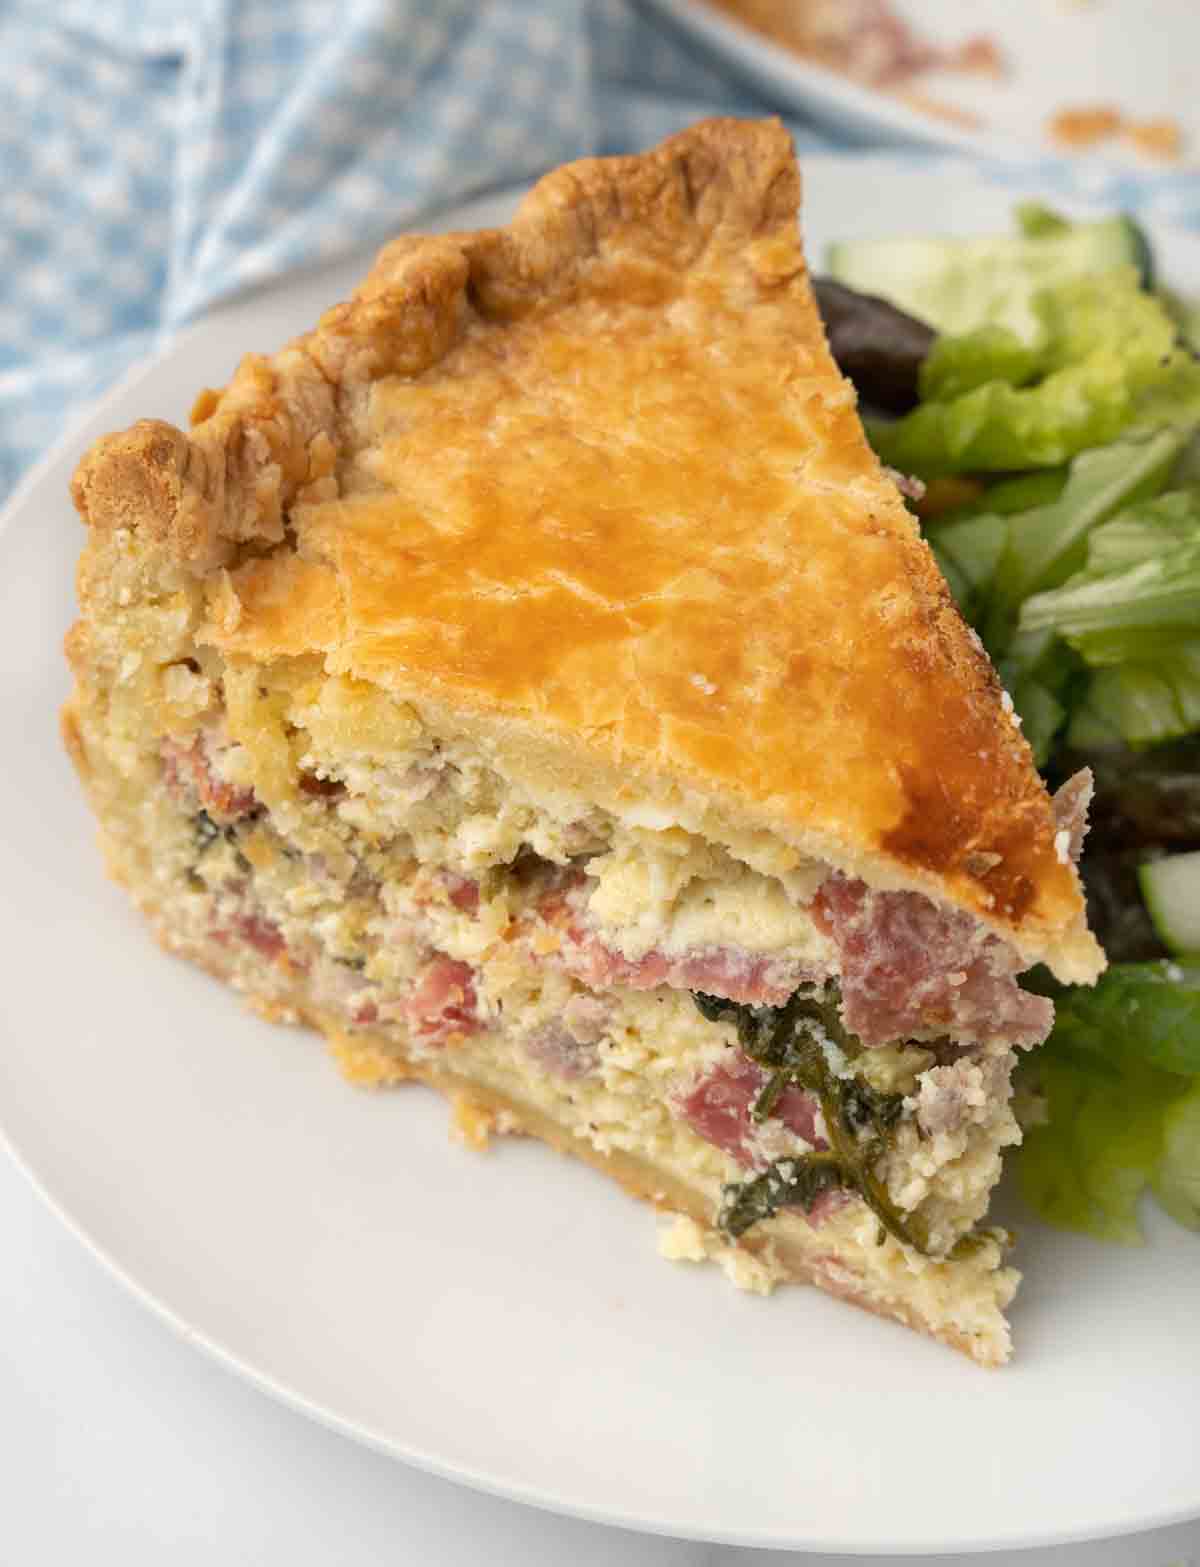 Slice of Pizza Rustica (Italian Easter Pie) on a white plate with salad.